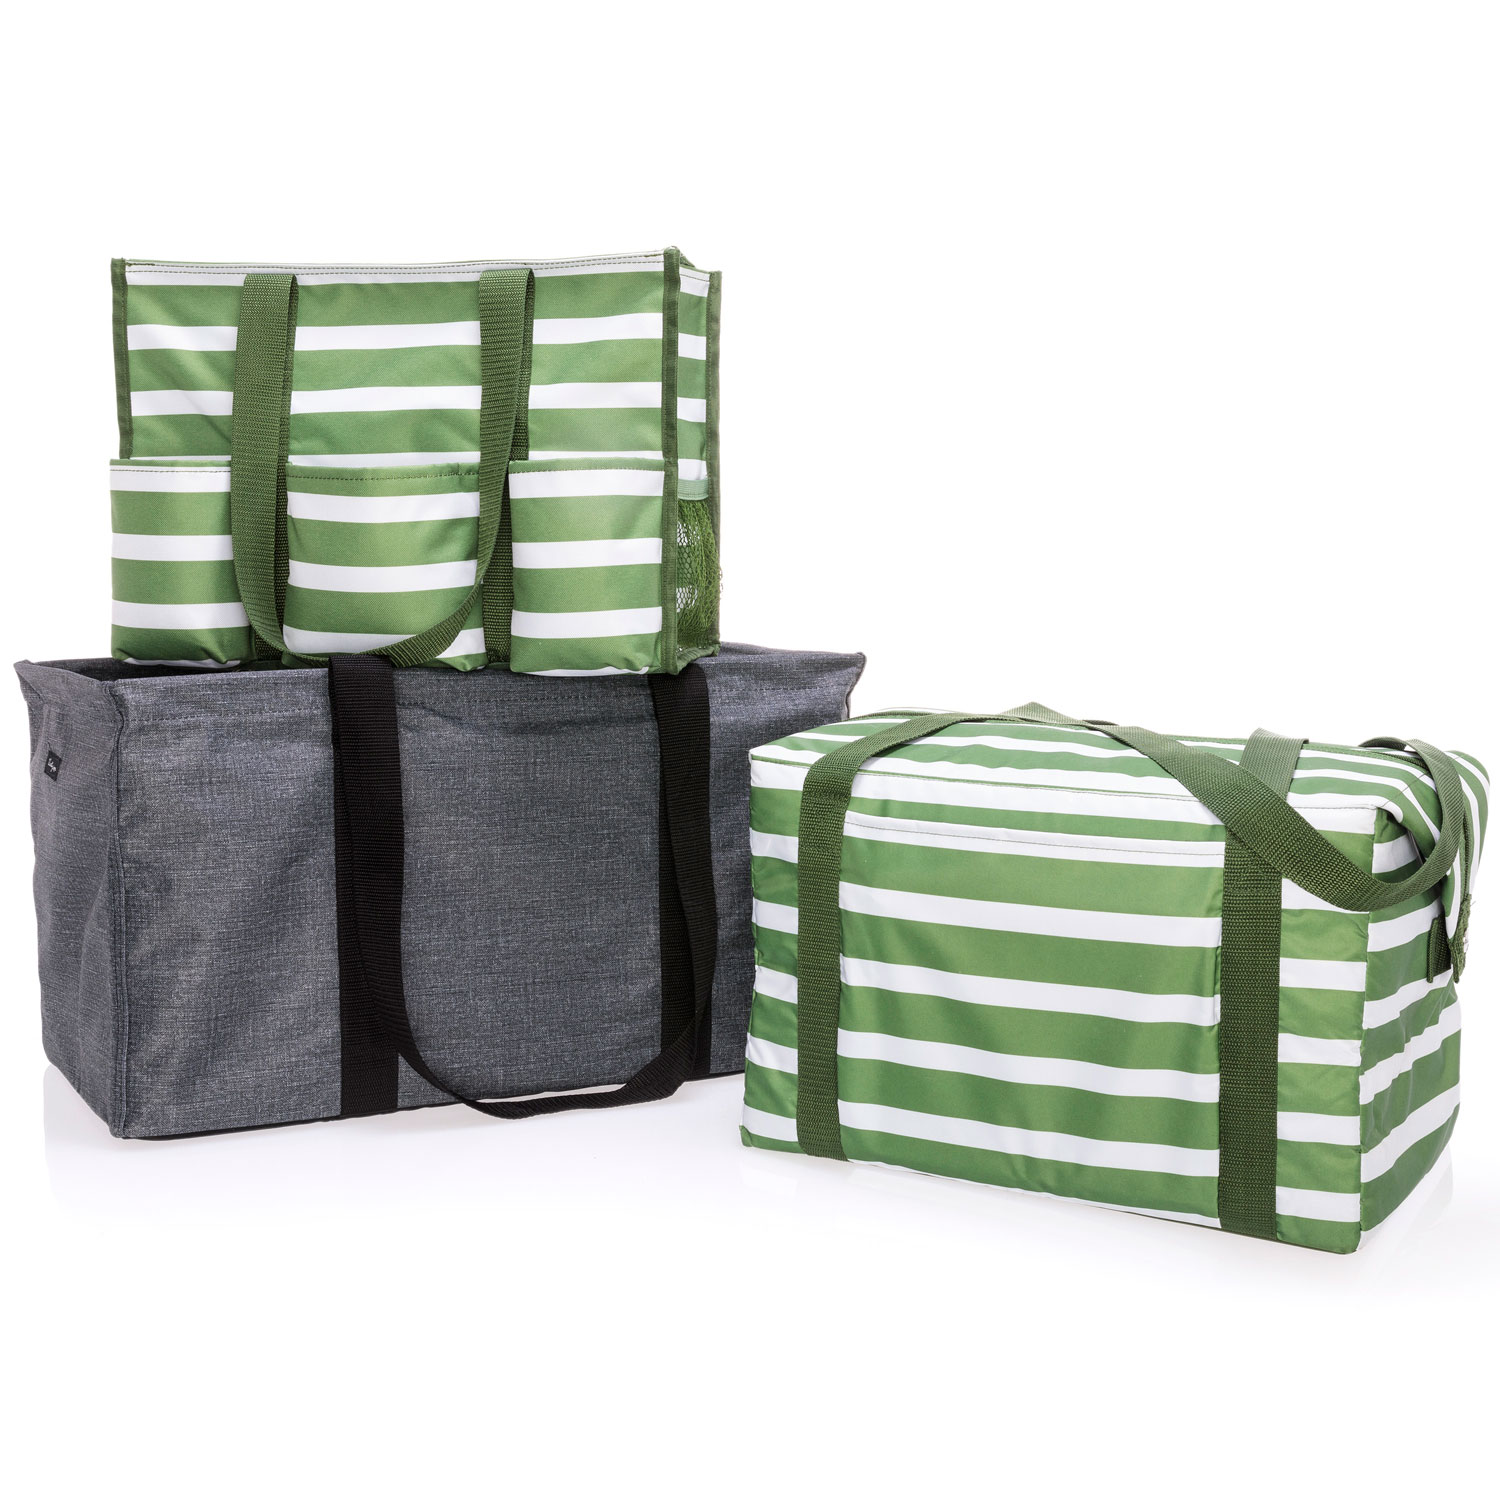 Charcoal Crosshatch - Fresh Market Thermal - Thirty-One Gifts